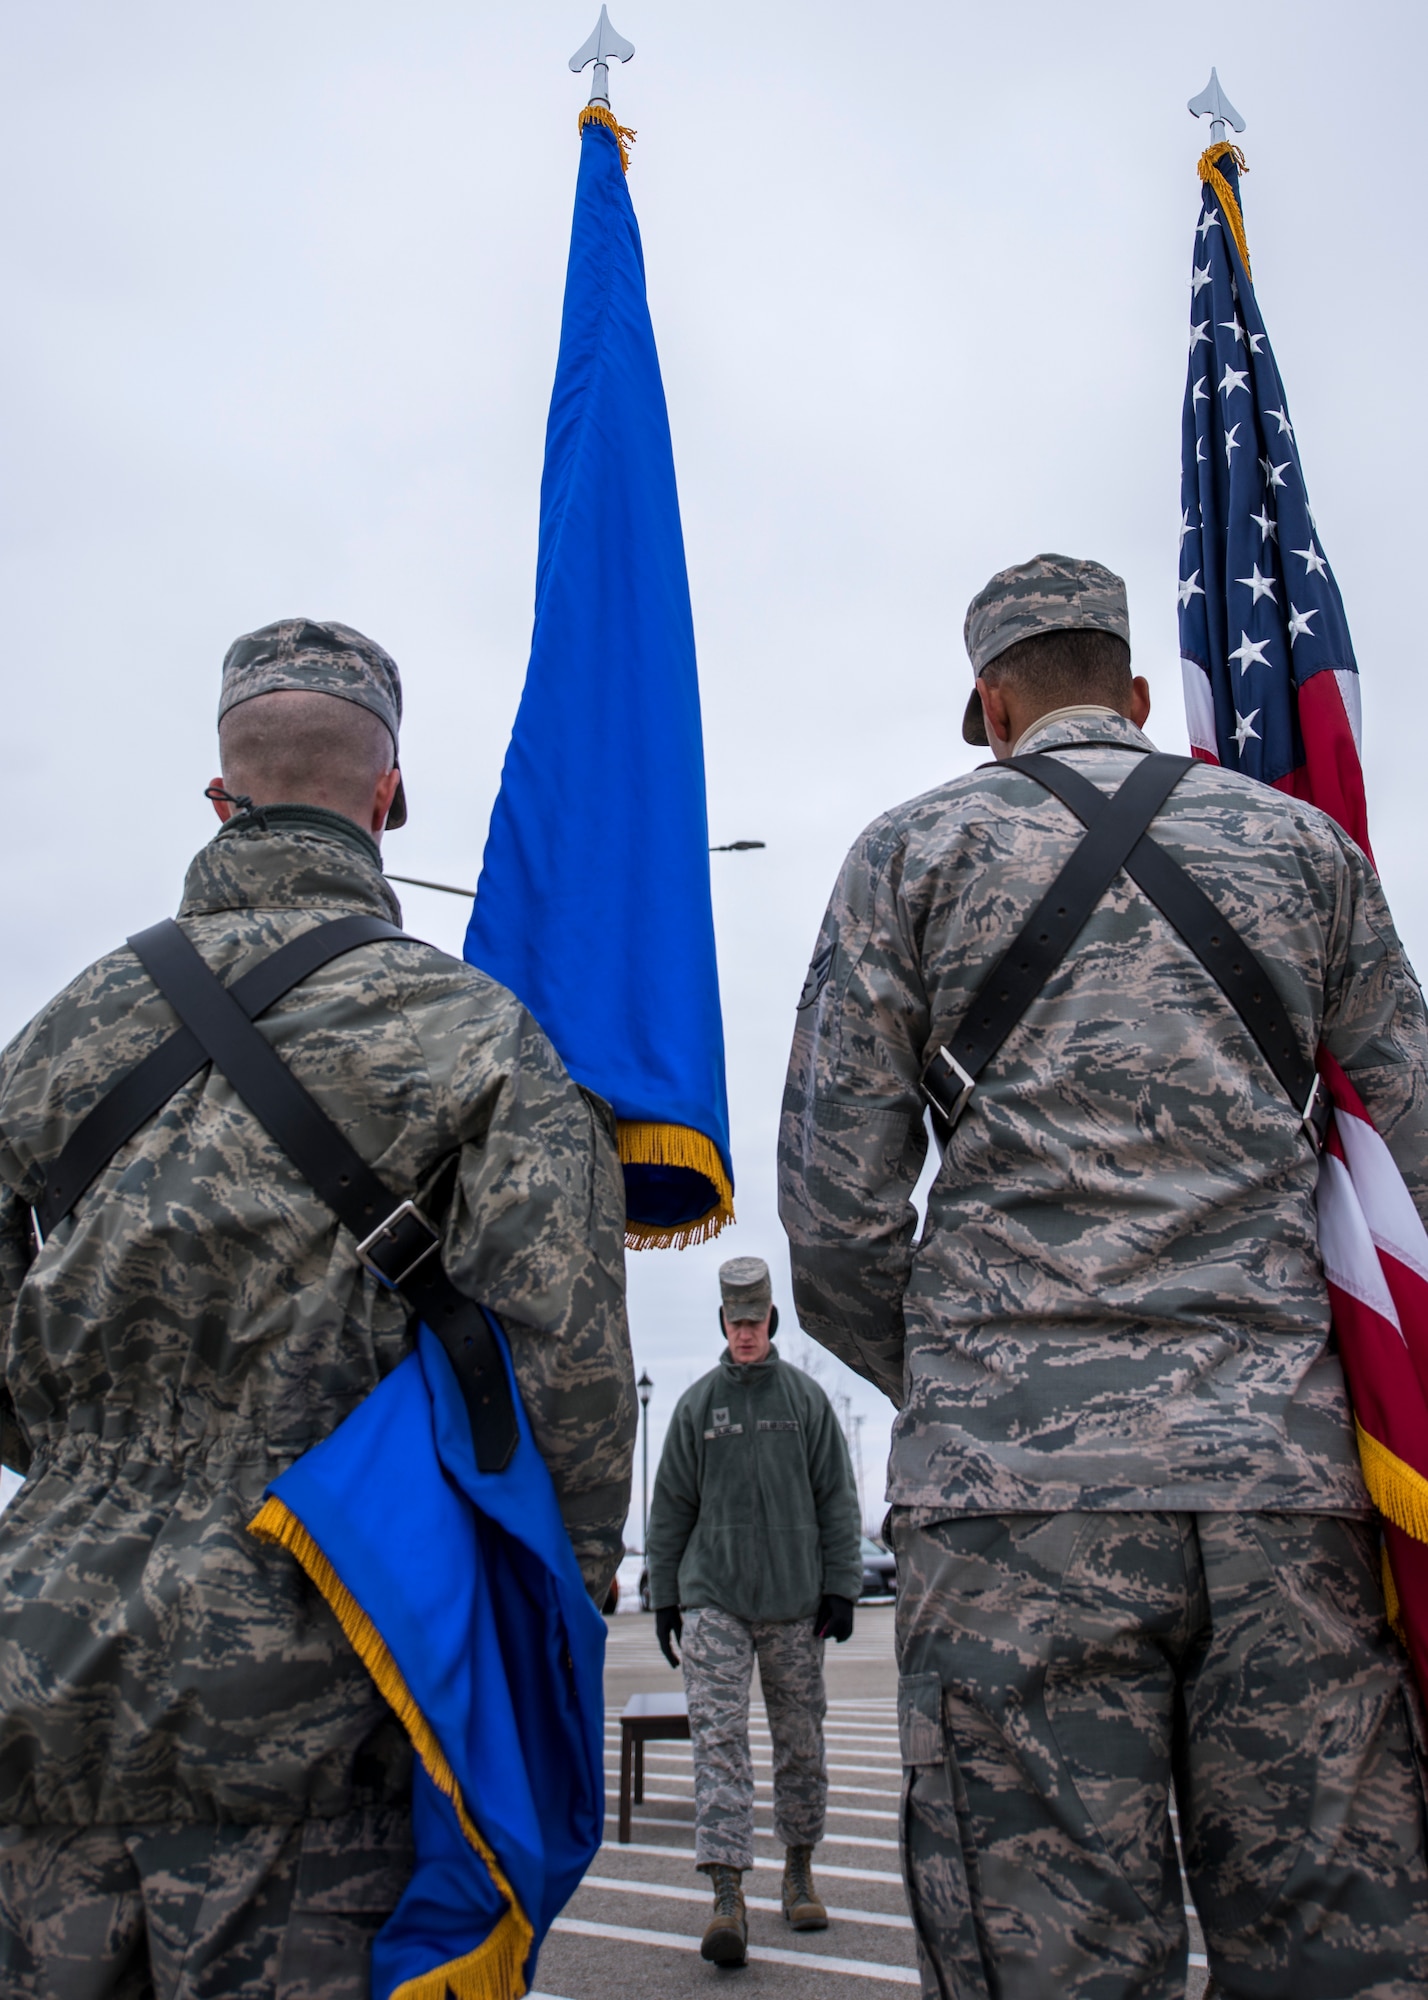 Staff Sgt. Mark Zajac, U.S. Air Force Honor Guard ceremonial guardsman training flight instructor, walks towards ceremonial guardsmen during funeral sequence training Dec. 7, 2018, at Mountain Home Air Force Base, Idaho. The U.S. Air Force Honor Guard held a ceremonial guardsman training course Dec. 3-12 to help the base honor guard maintain their skills during multiple member sequence training. (U.S. Air Force photo by Airman 1st Class Andrew Kobialka)